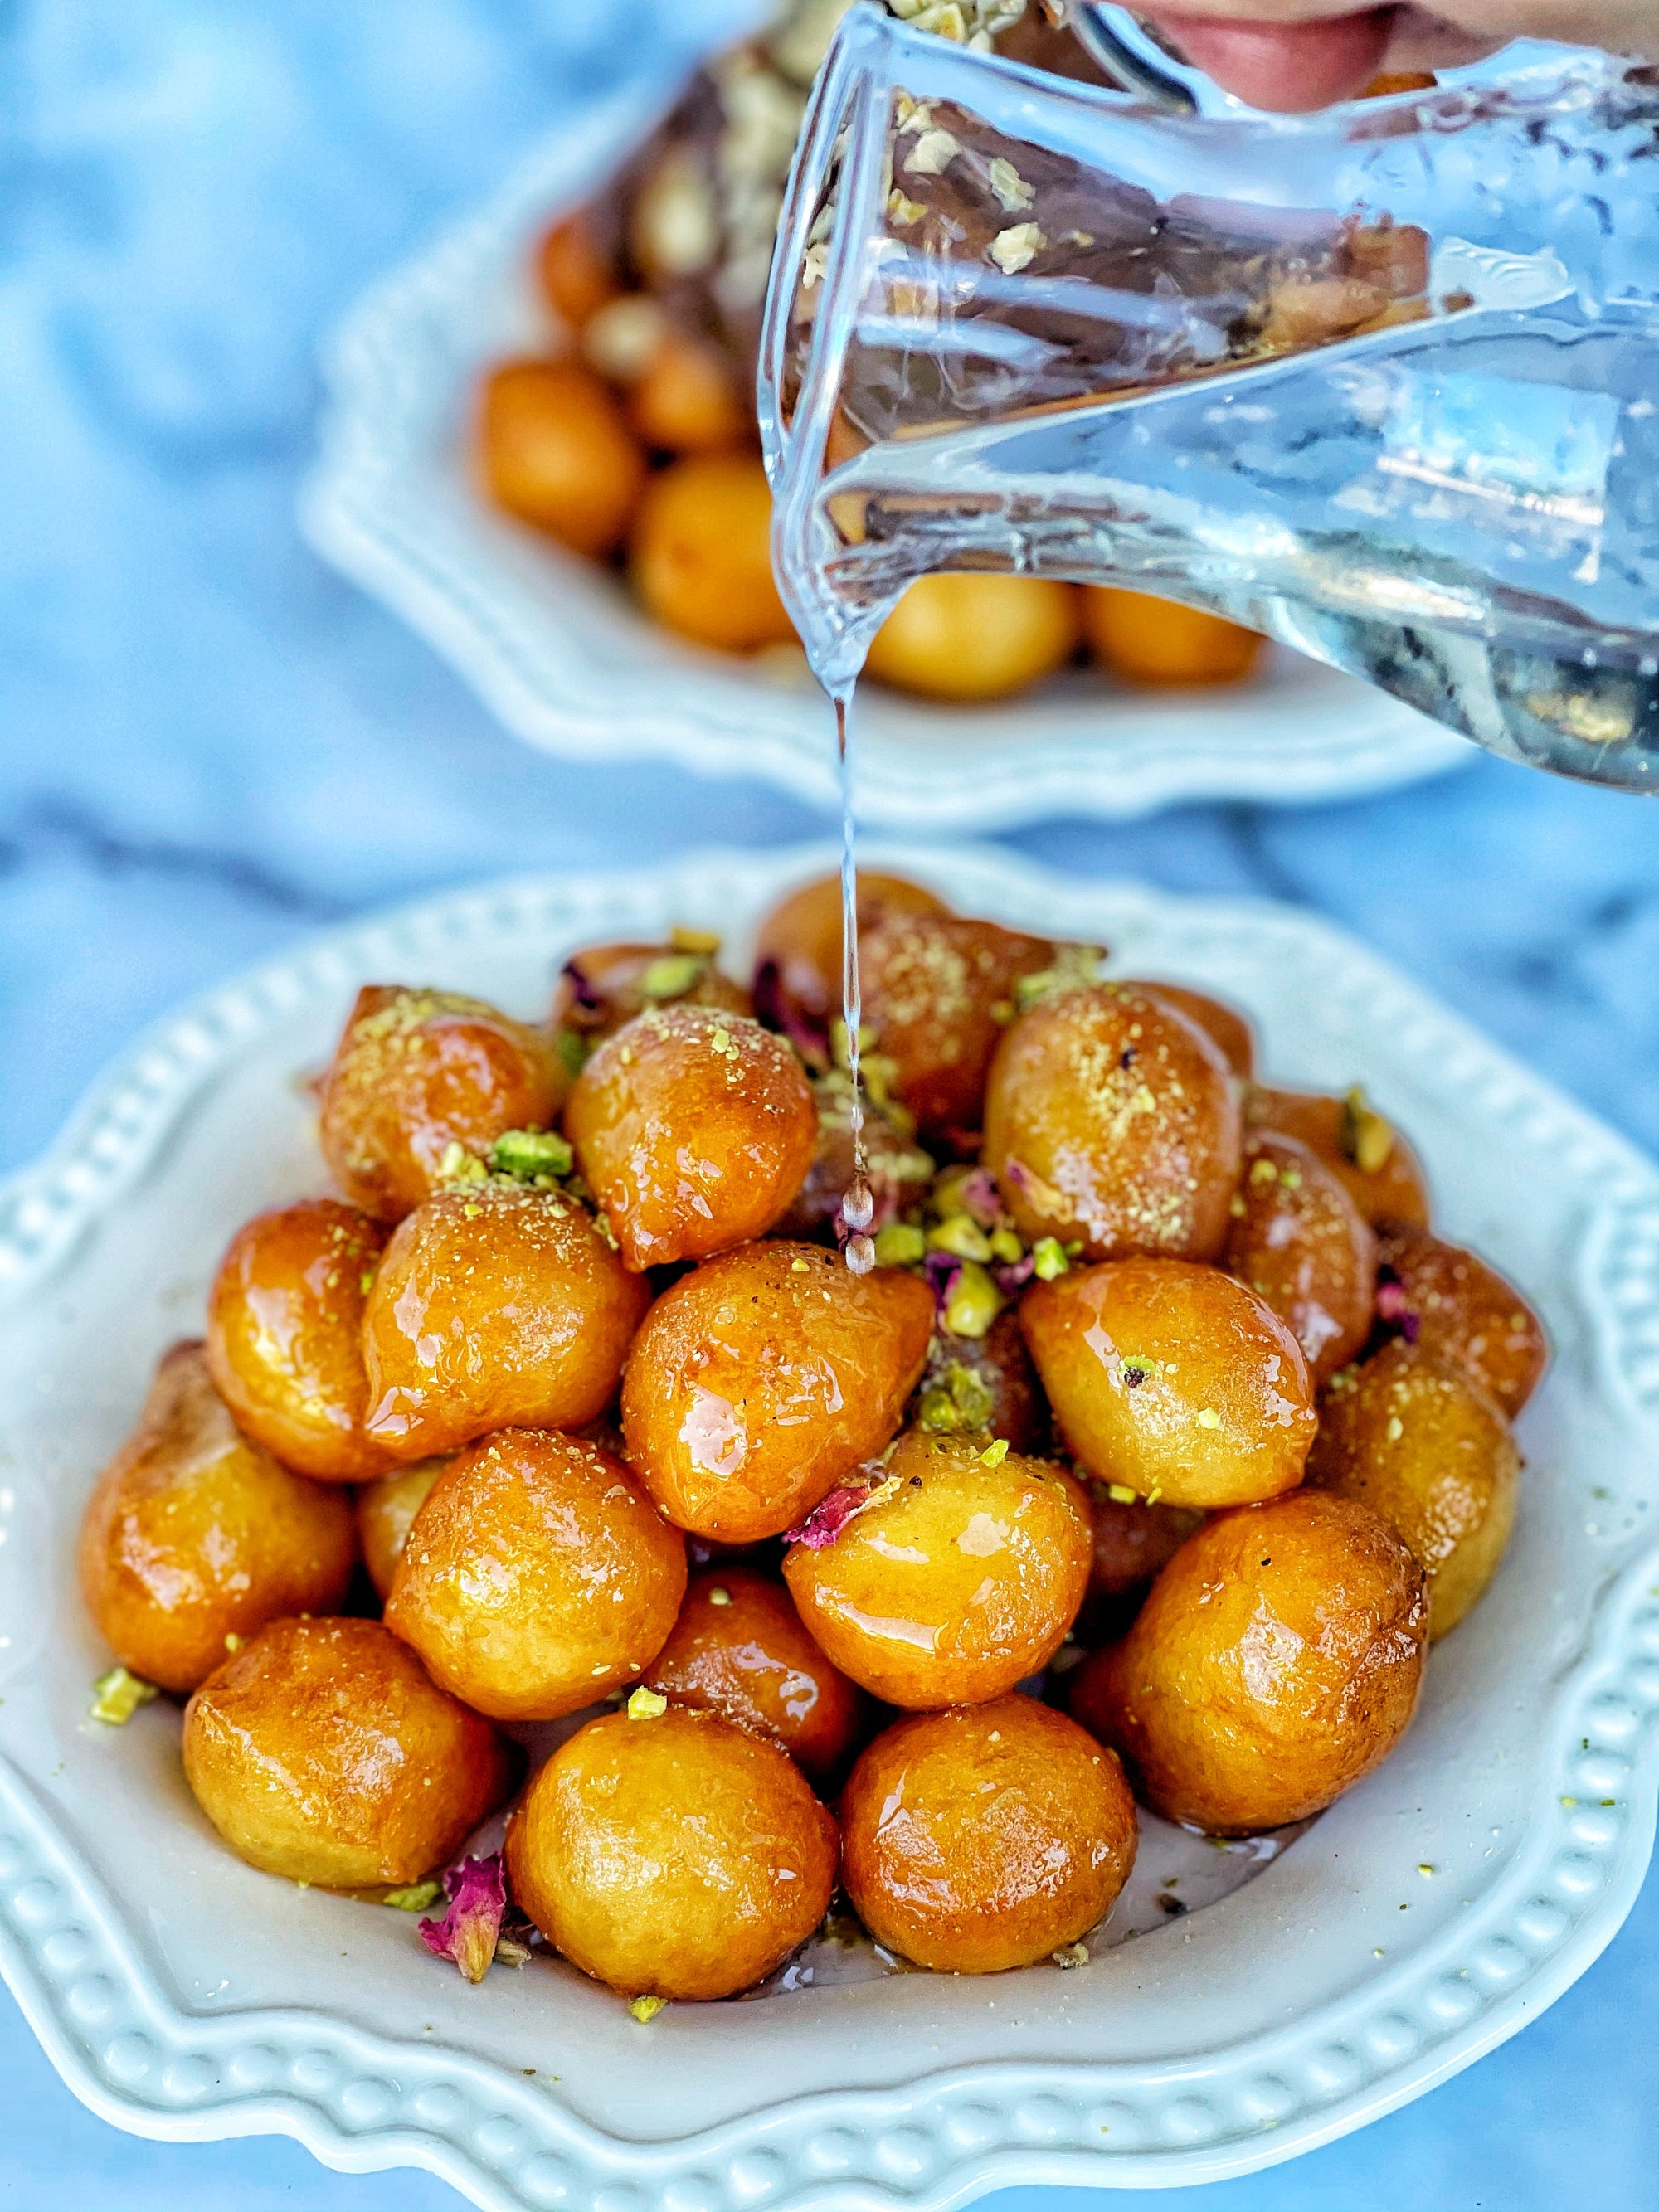 Fried Dough Balls in Syrup 'Awameh'